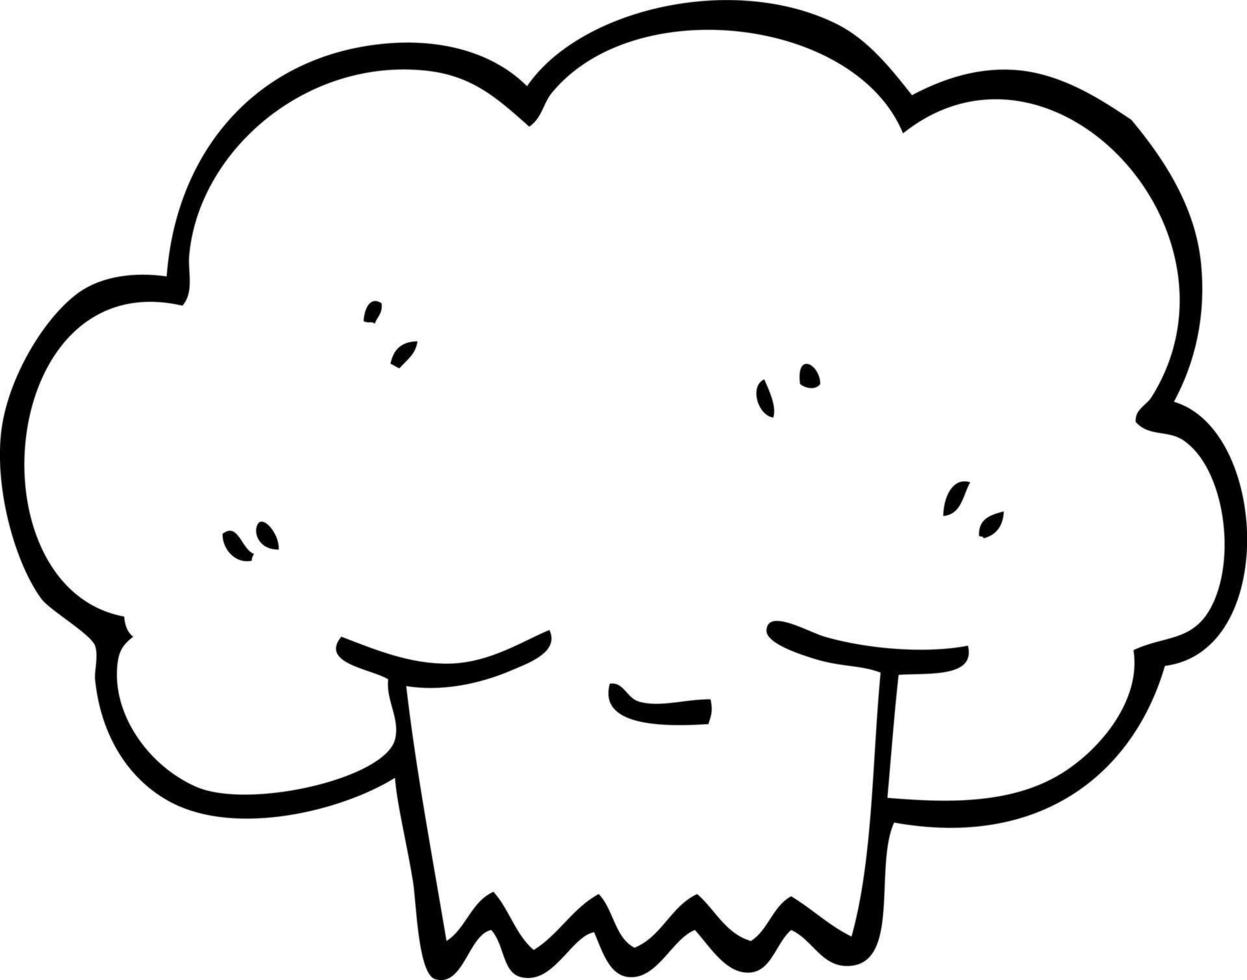 black and white cartoon explosion cloud vector